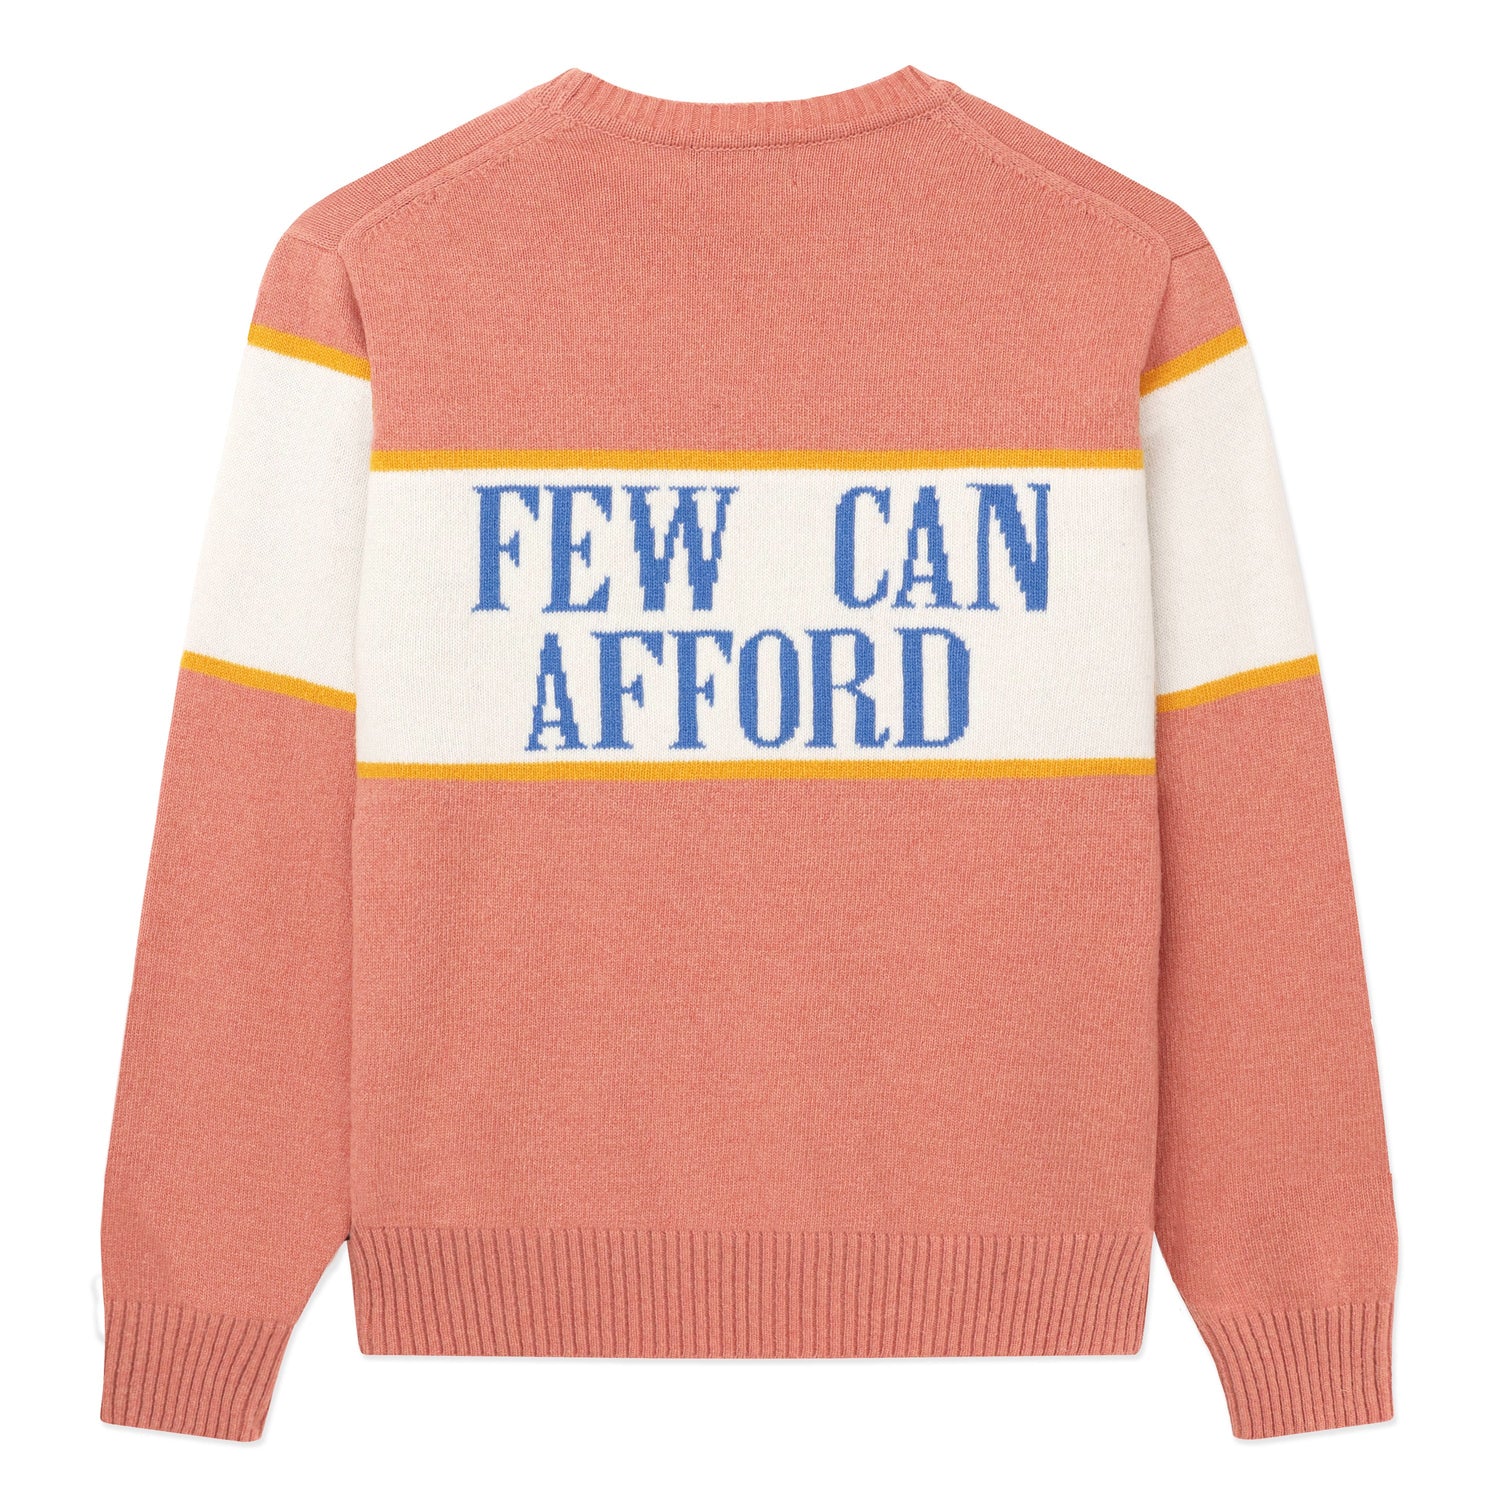 Pink sweater with "Few Can Afford" across the back.